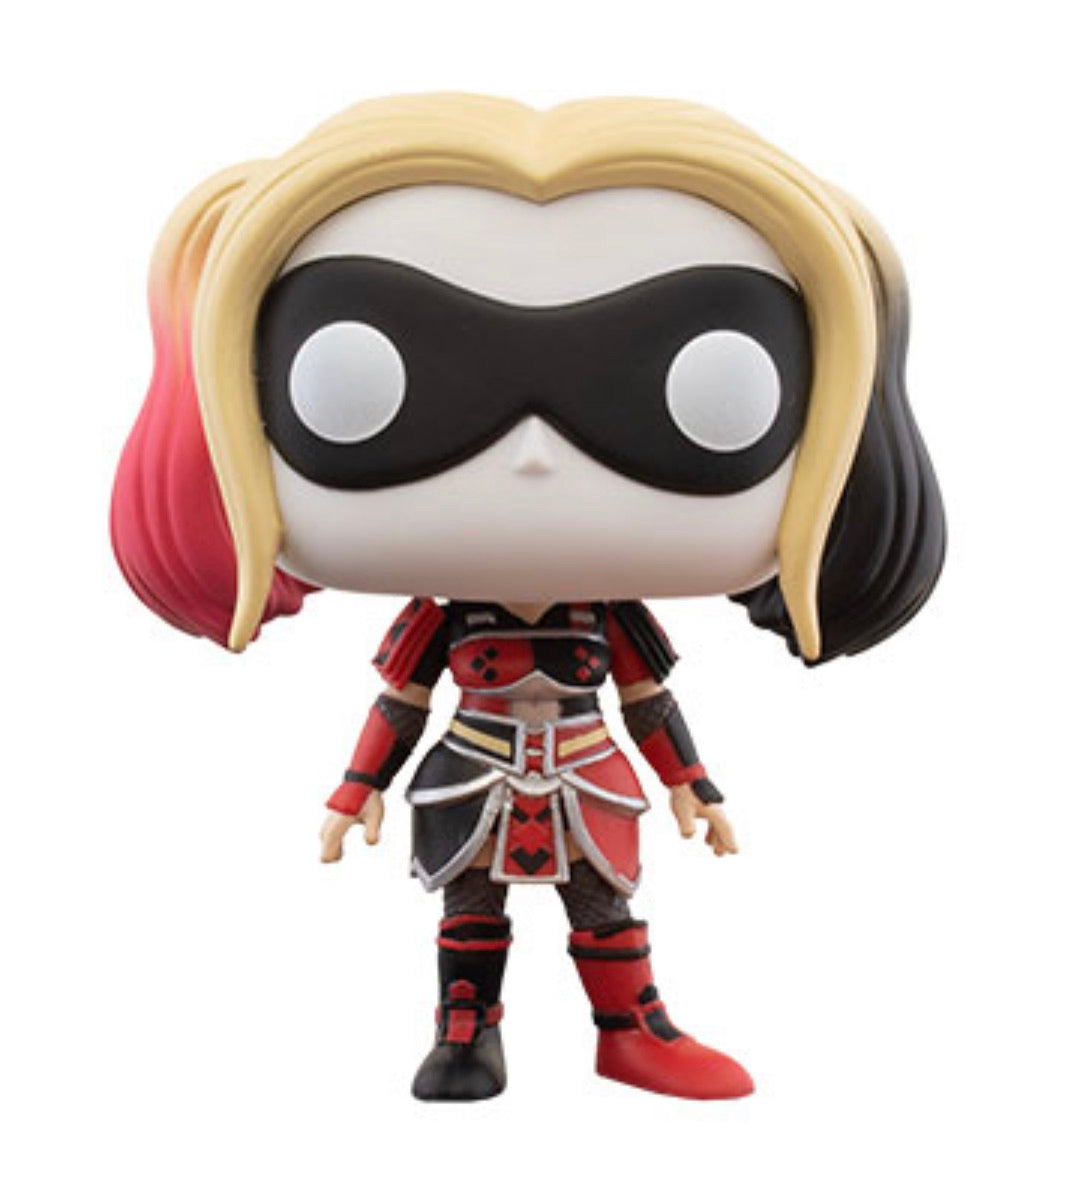 Pop! Heroes: DC Imperial Palace Wave 1 (Preorder)